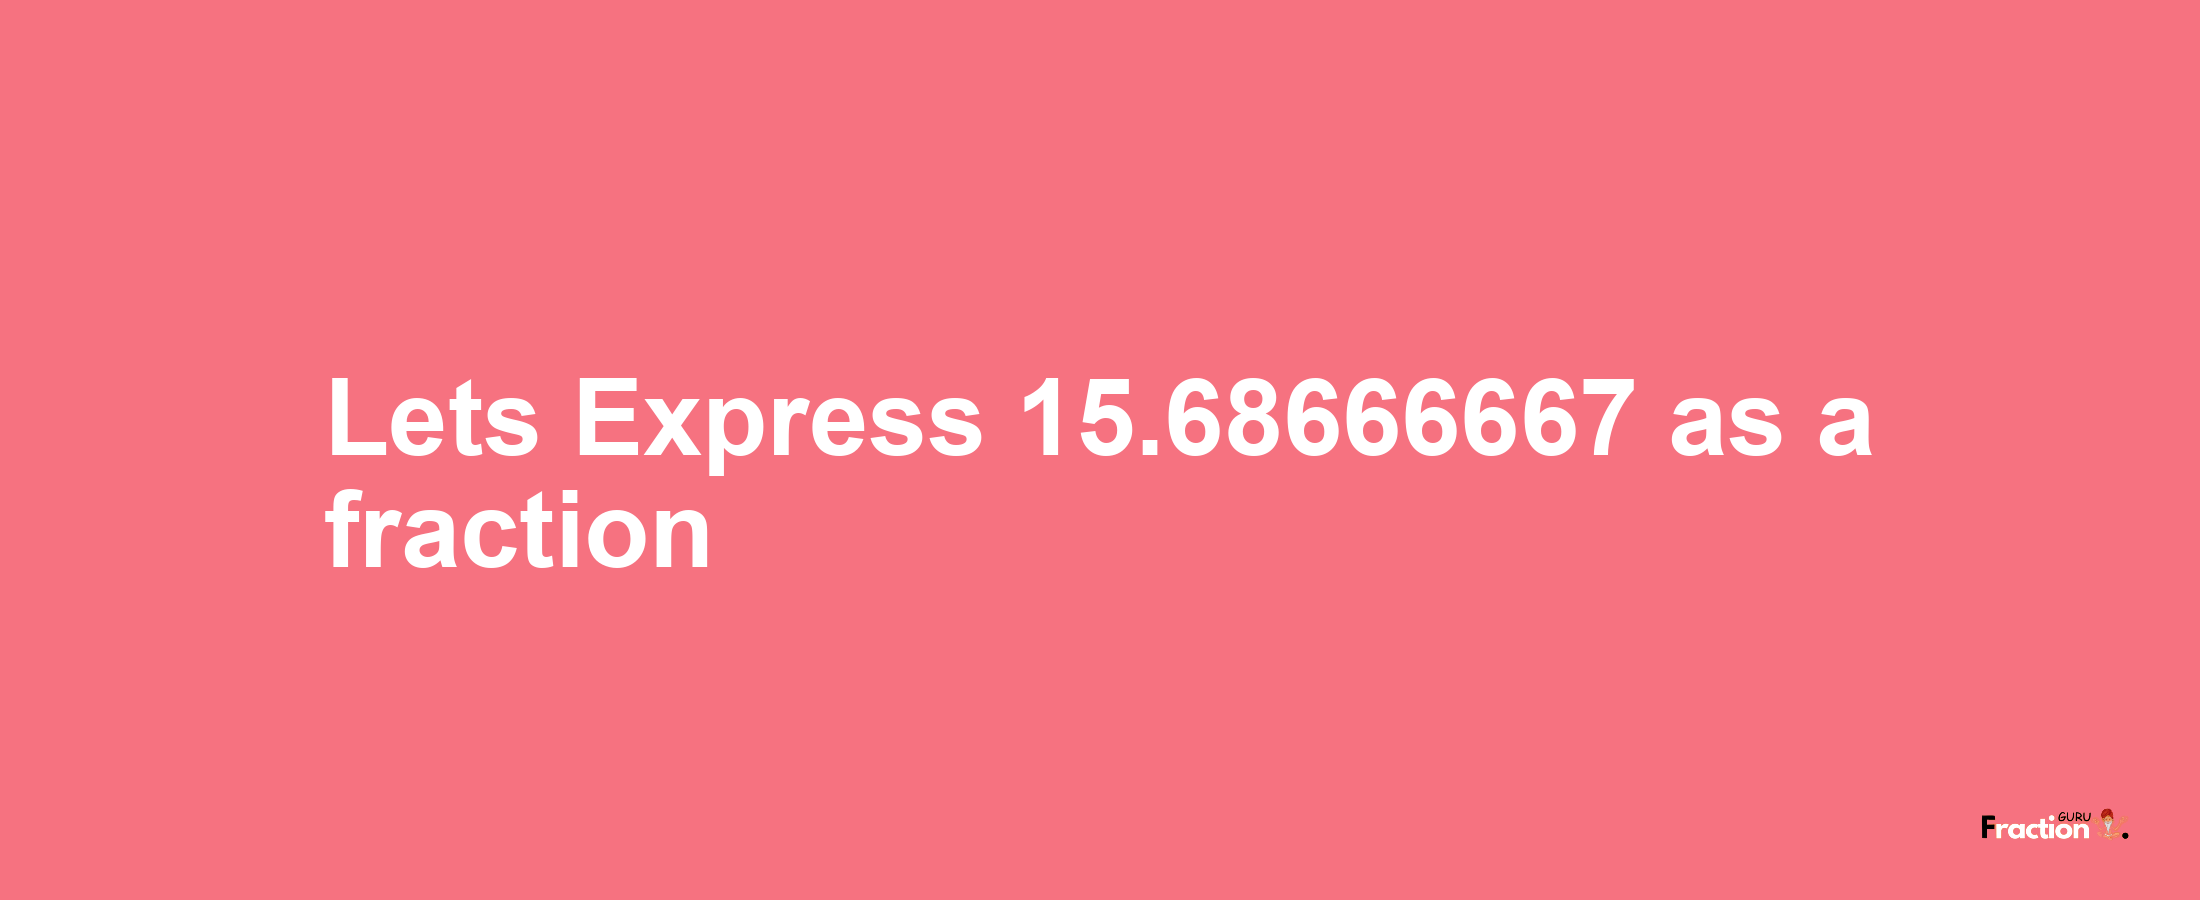 Lets Express 15.68666667 as afraction